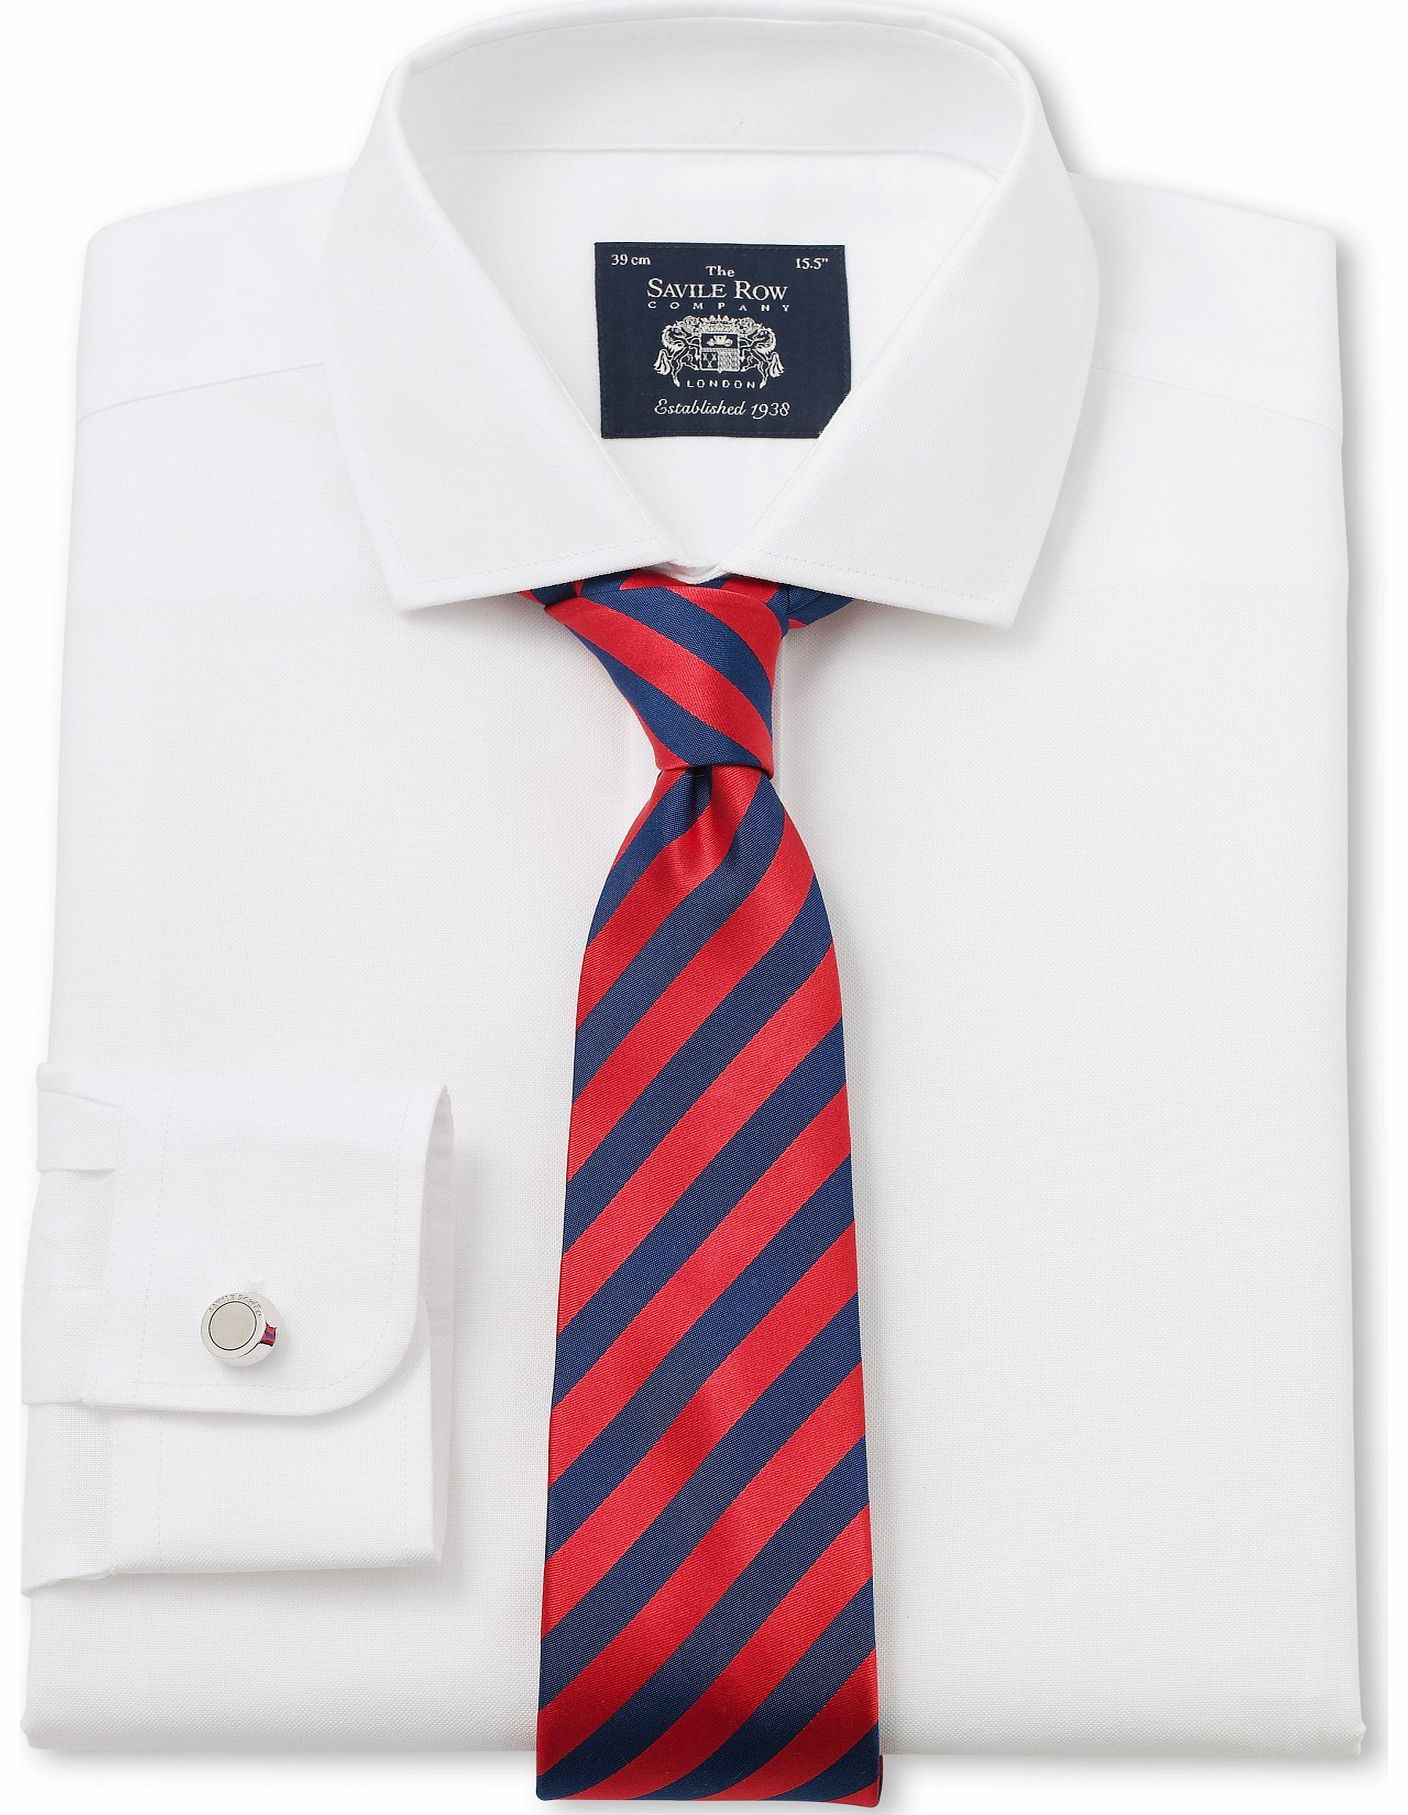 Savile Row Company White Pinpoint Extra Slim Fit Shirt 17`` Double